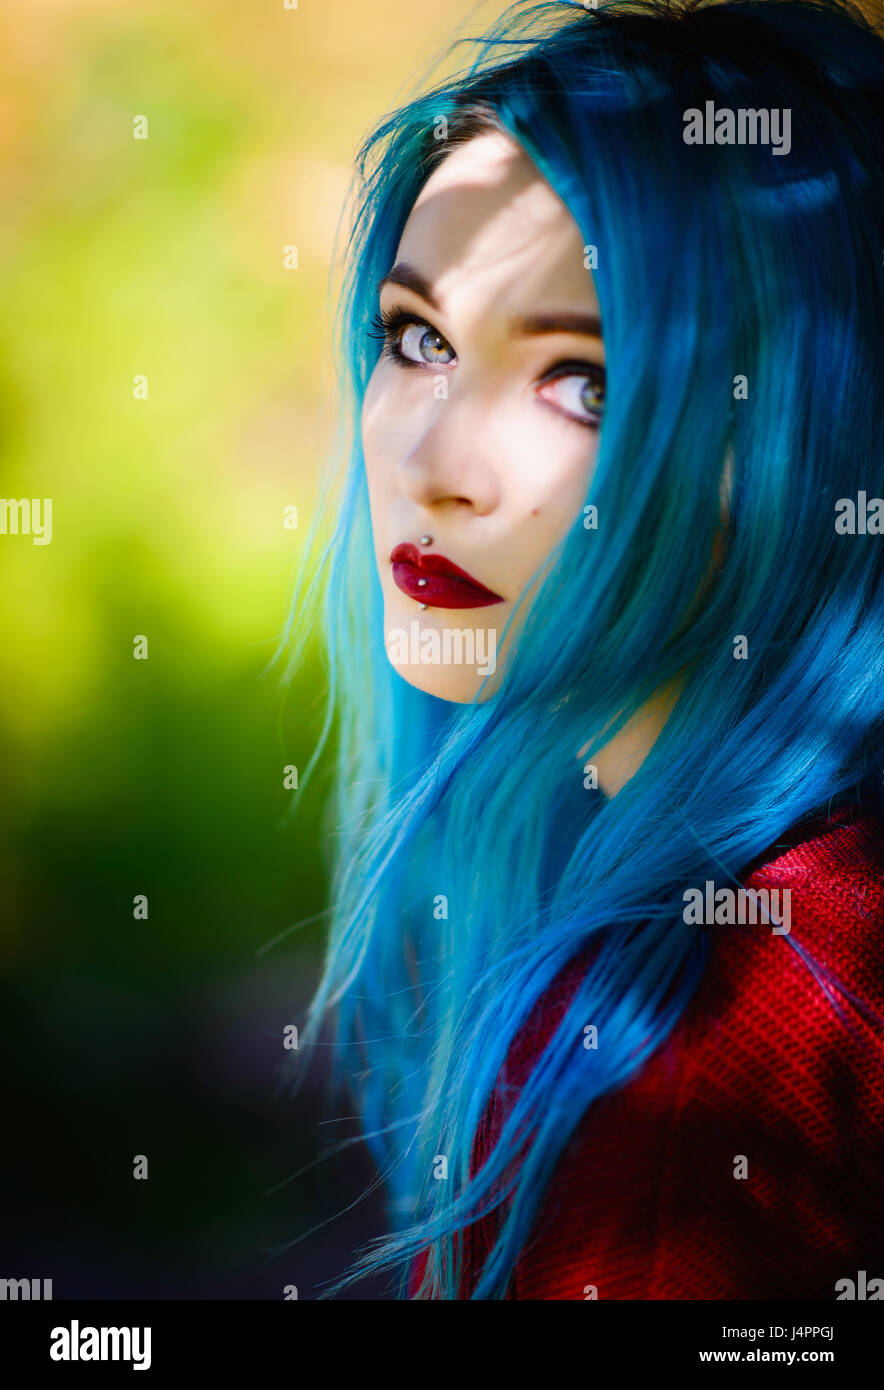 Close-up portrait of a pretty young girl with blue hair Stock Photo